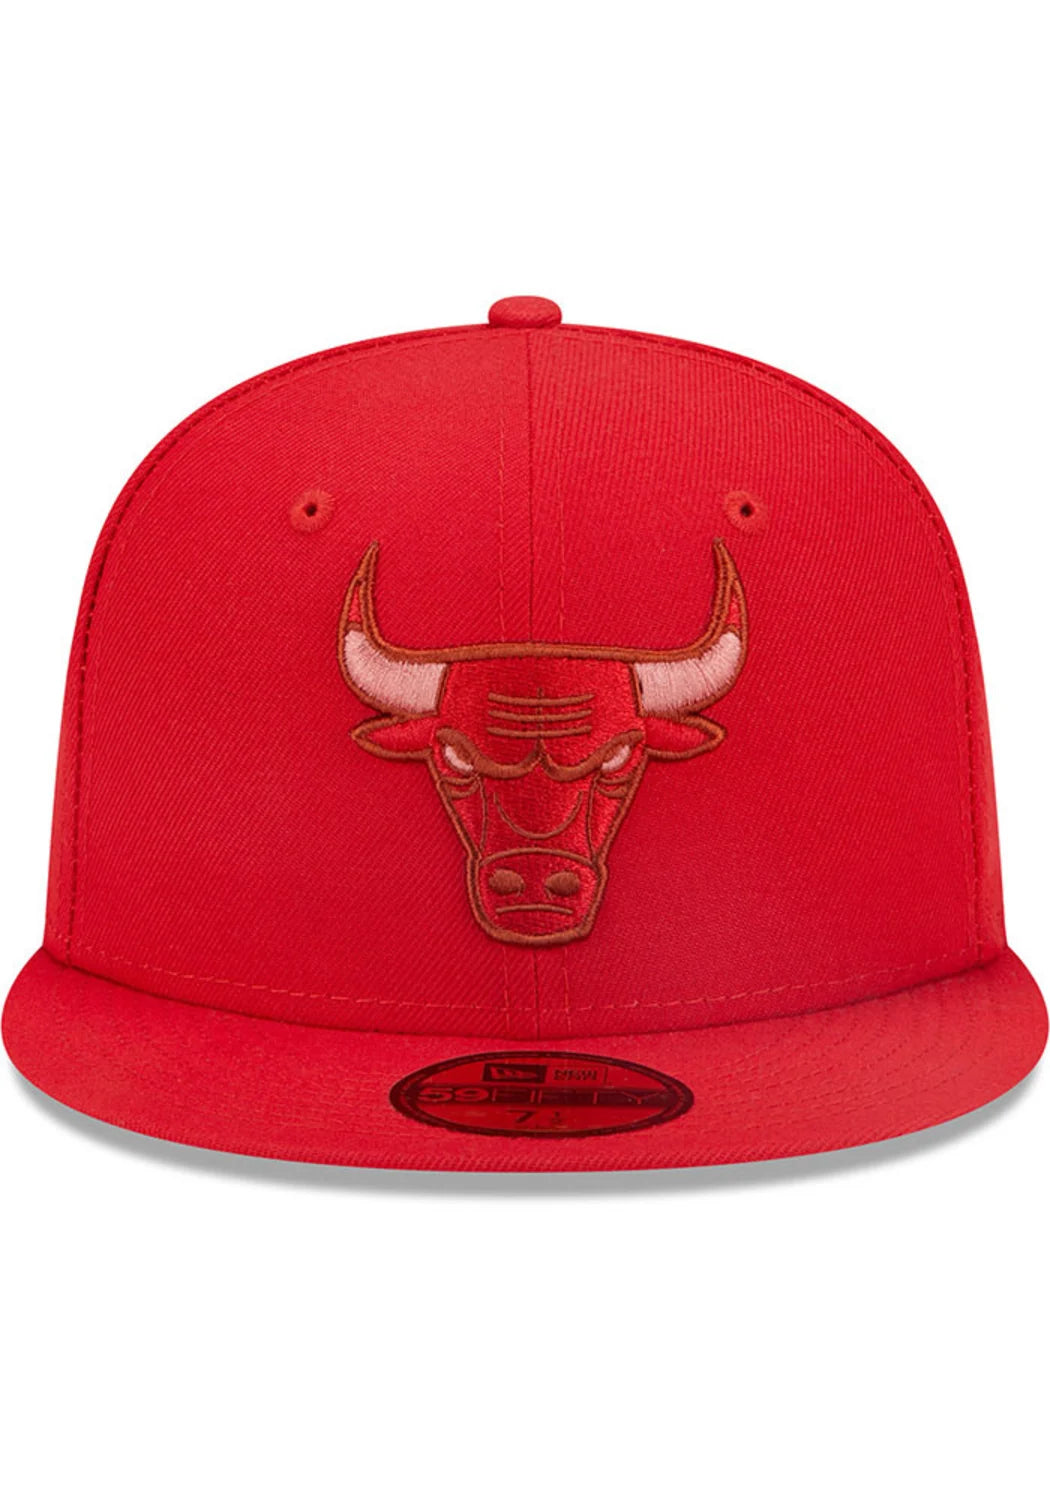 New Era - Chicago Bulls Red Monocamo Fitted Hat